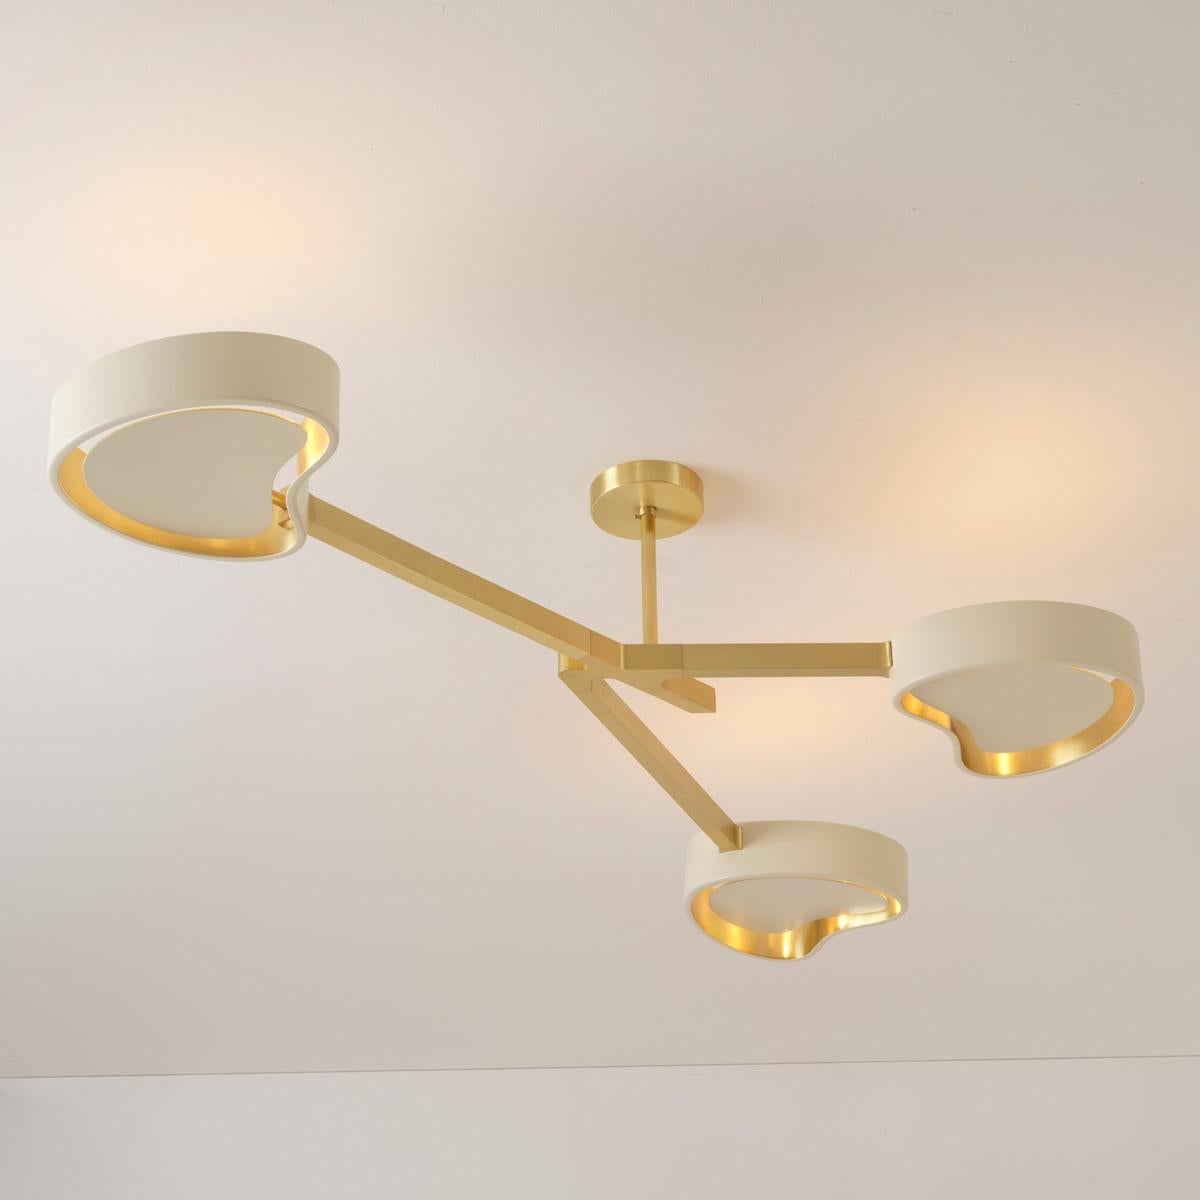 Italian Cuore N.3 Ceiling Light by Gaspare Asaro. Polished Brass Finish For Sale